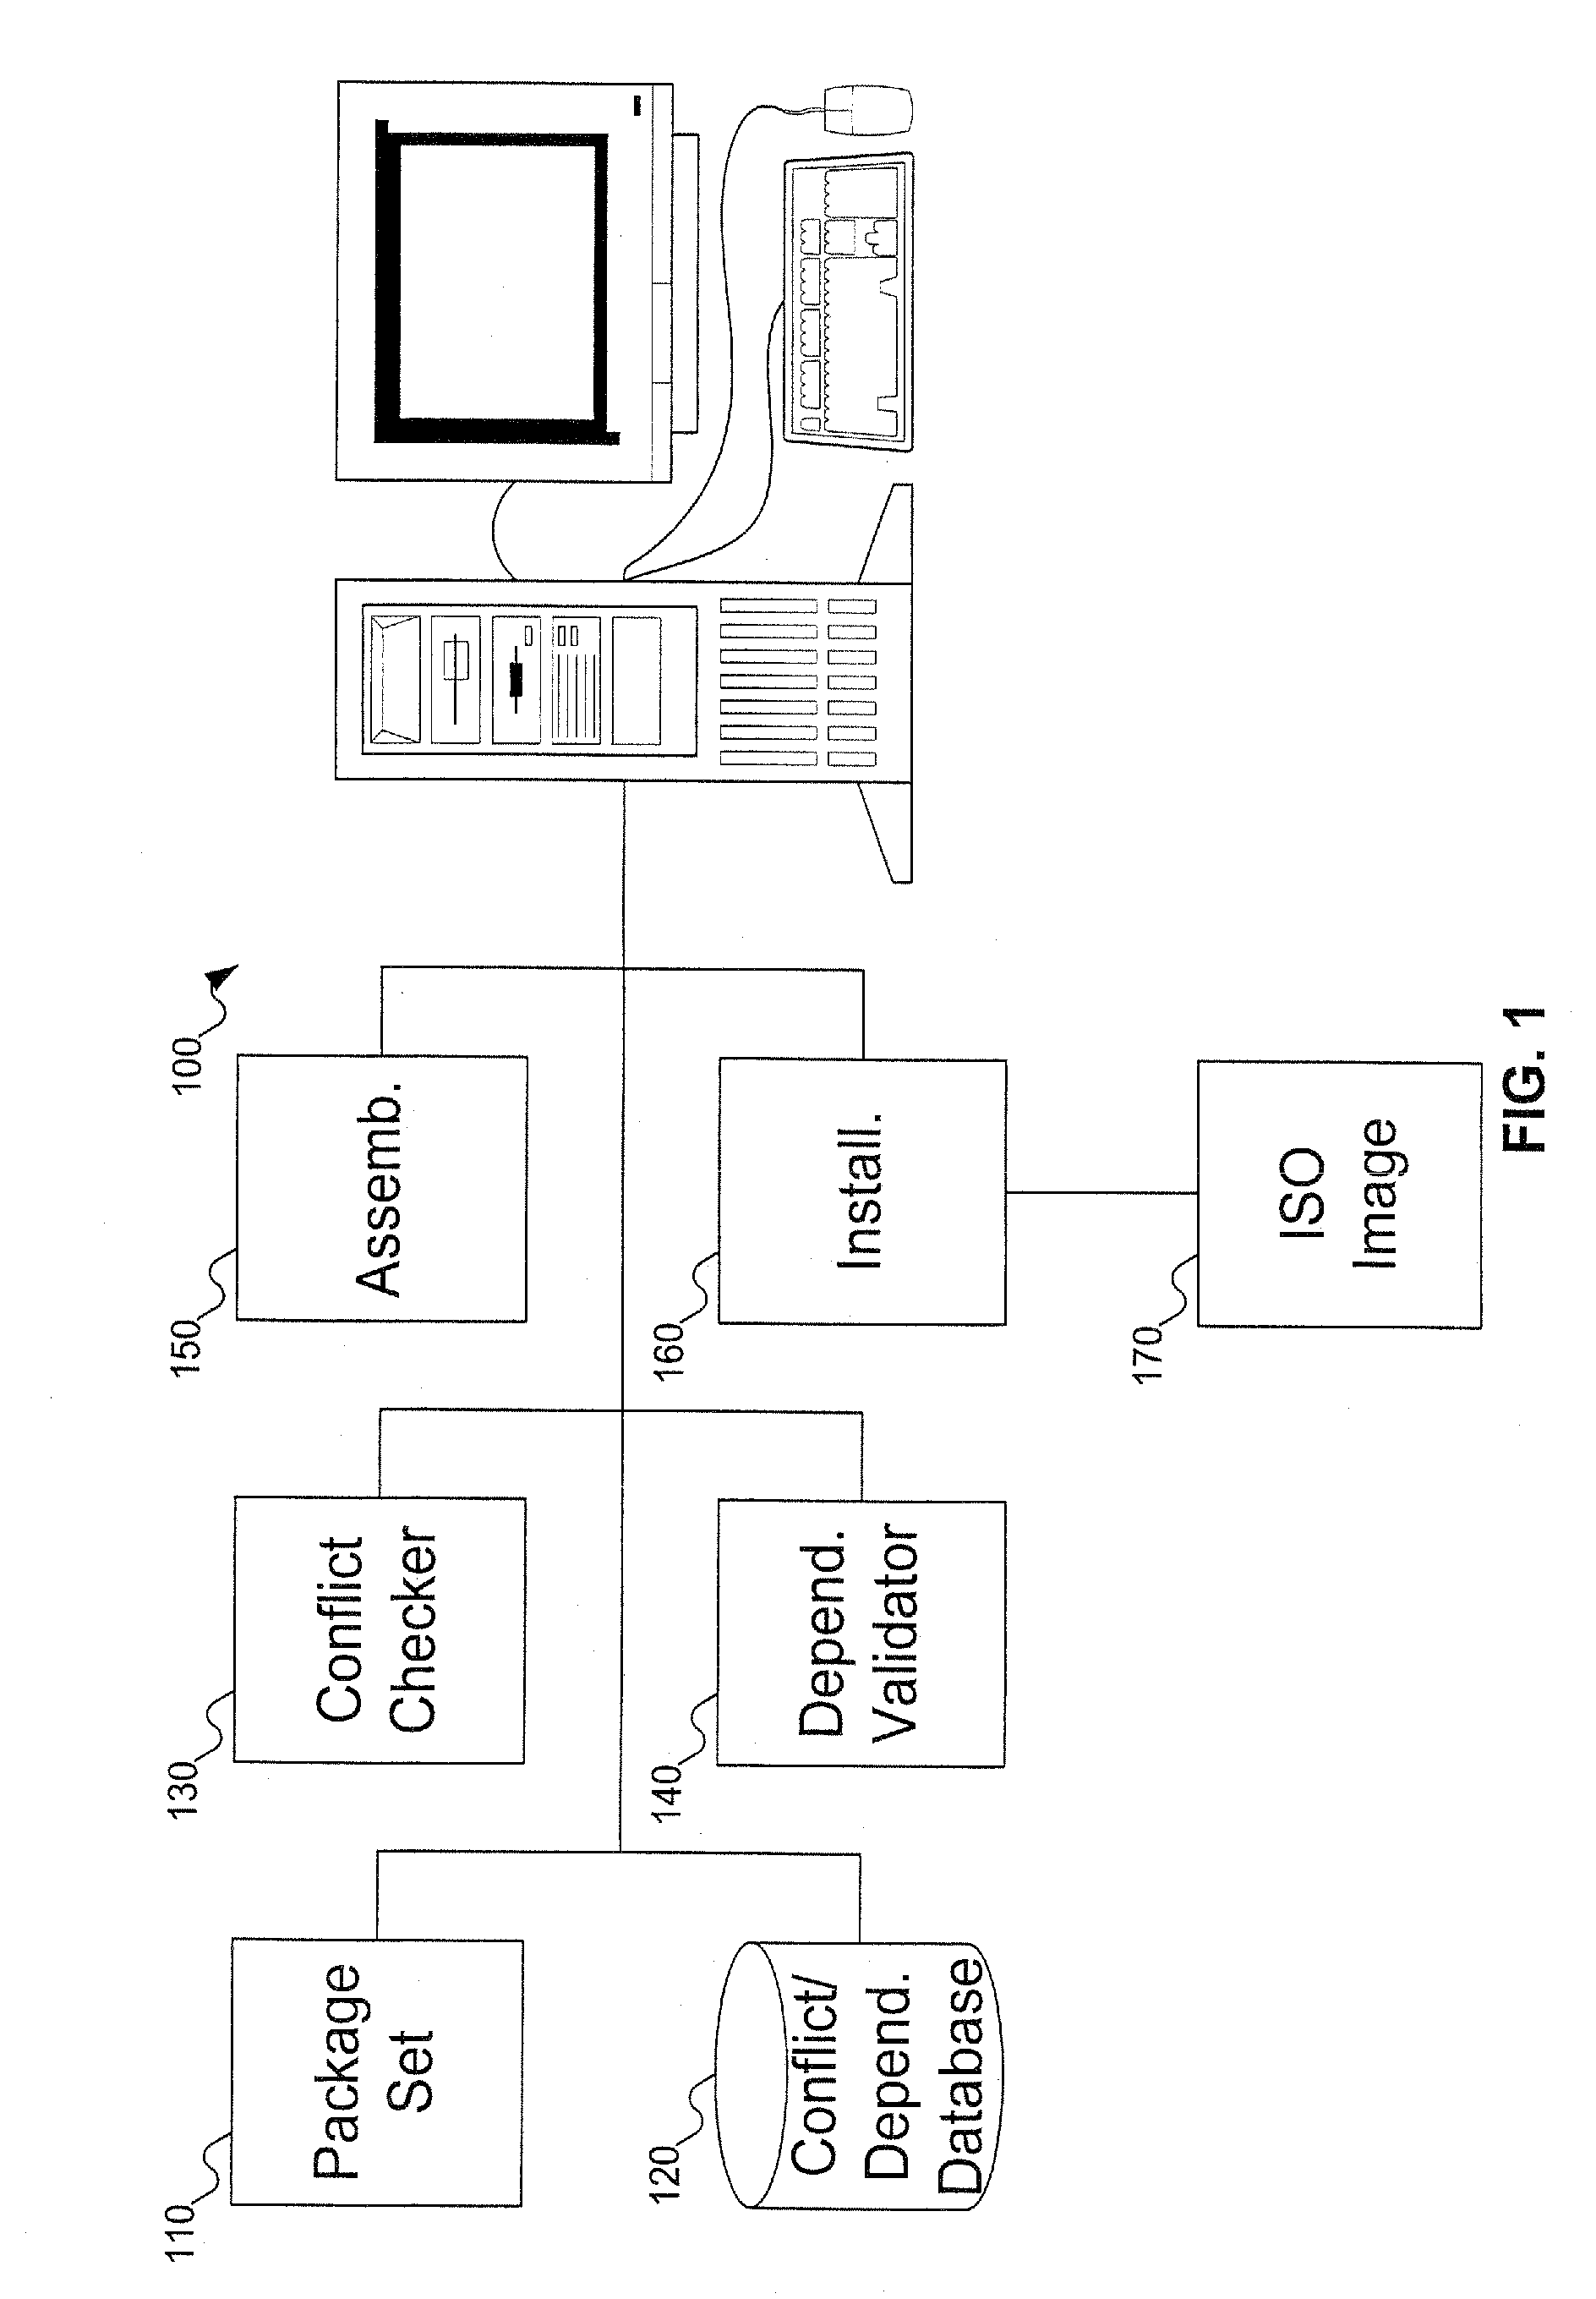 System and method for creating a customized installation on demand